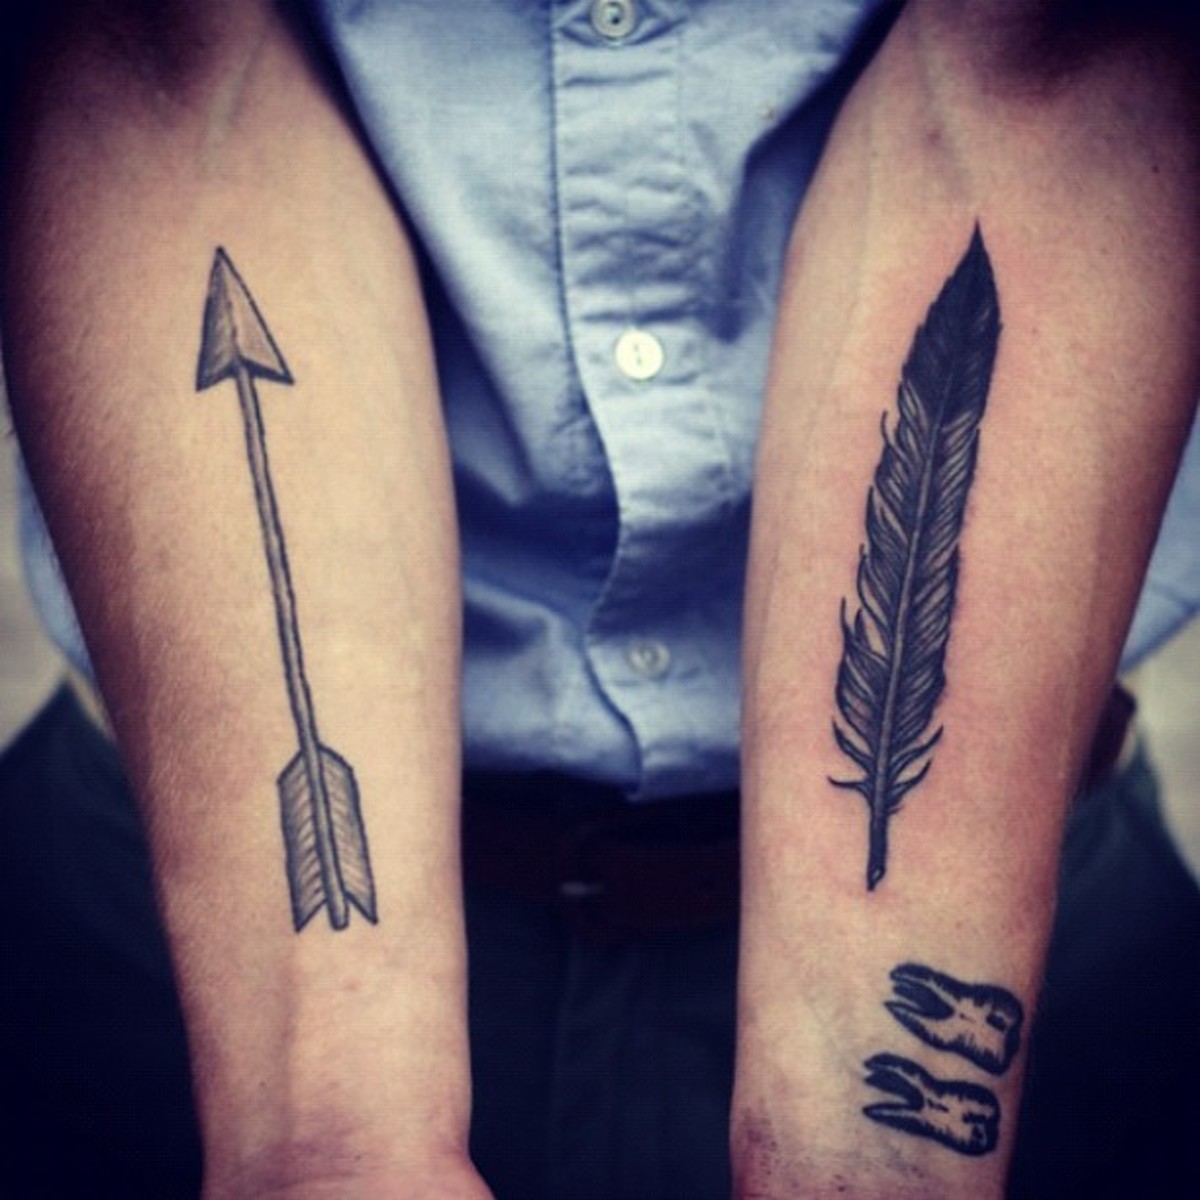 Arrows and feathers, like pens and swords, are symbols that go well together.